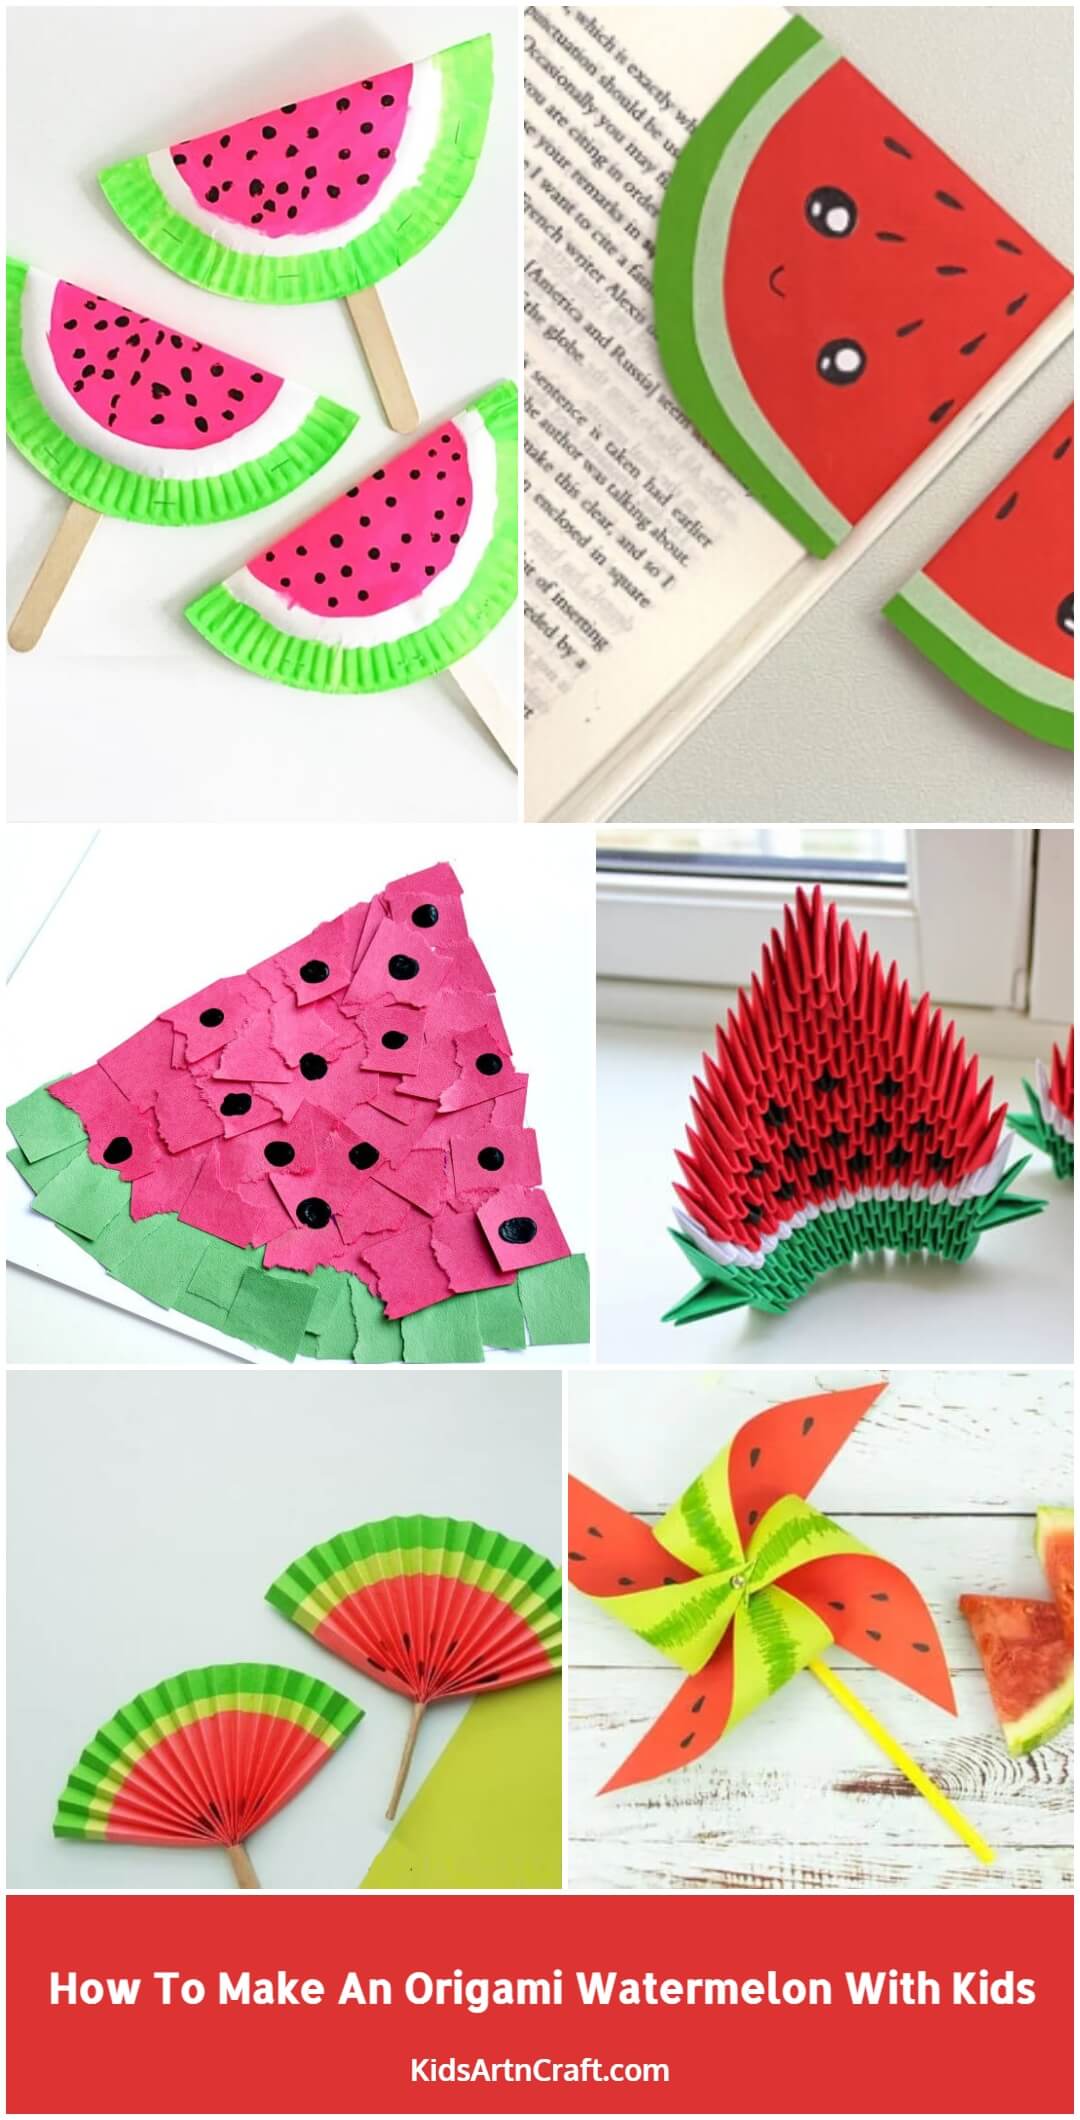 How To Make An Origami Watermelon With Kids